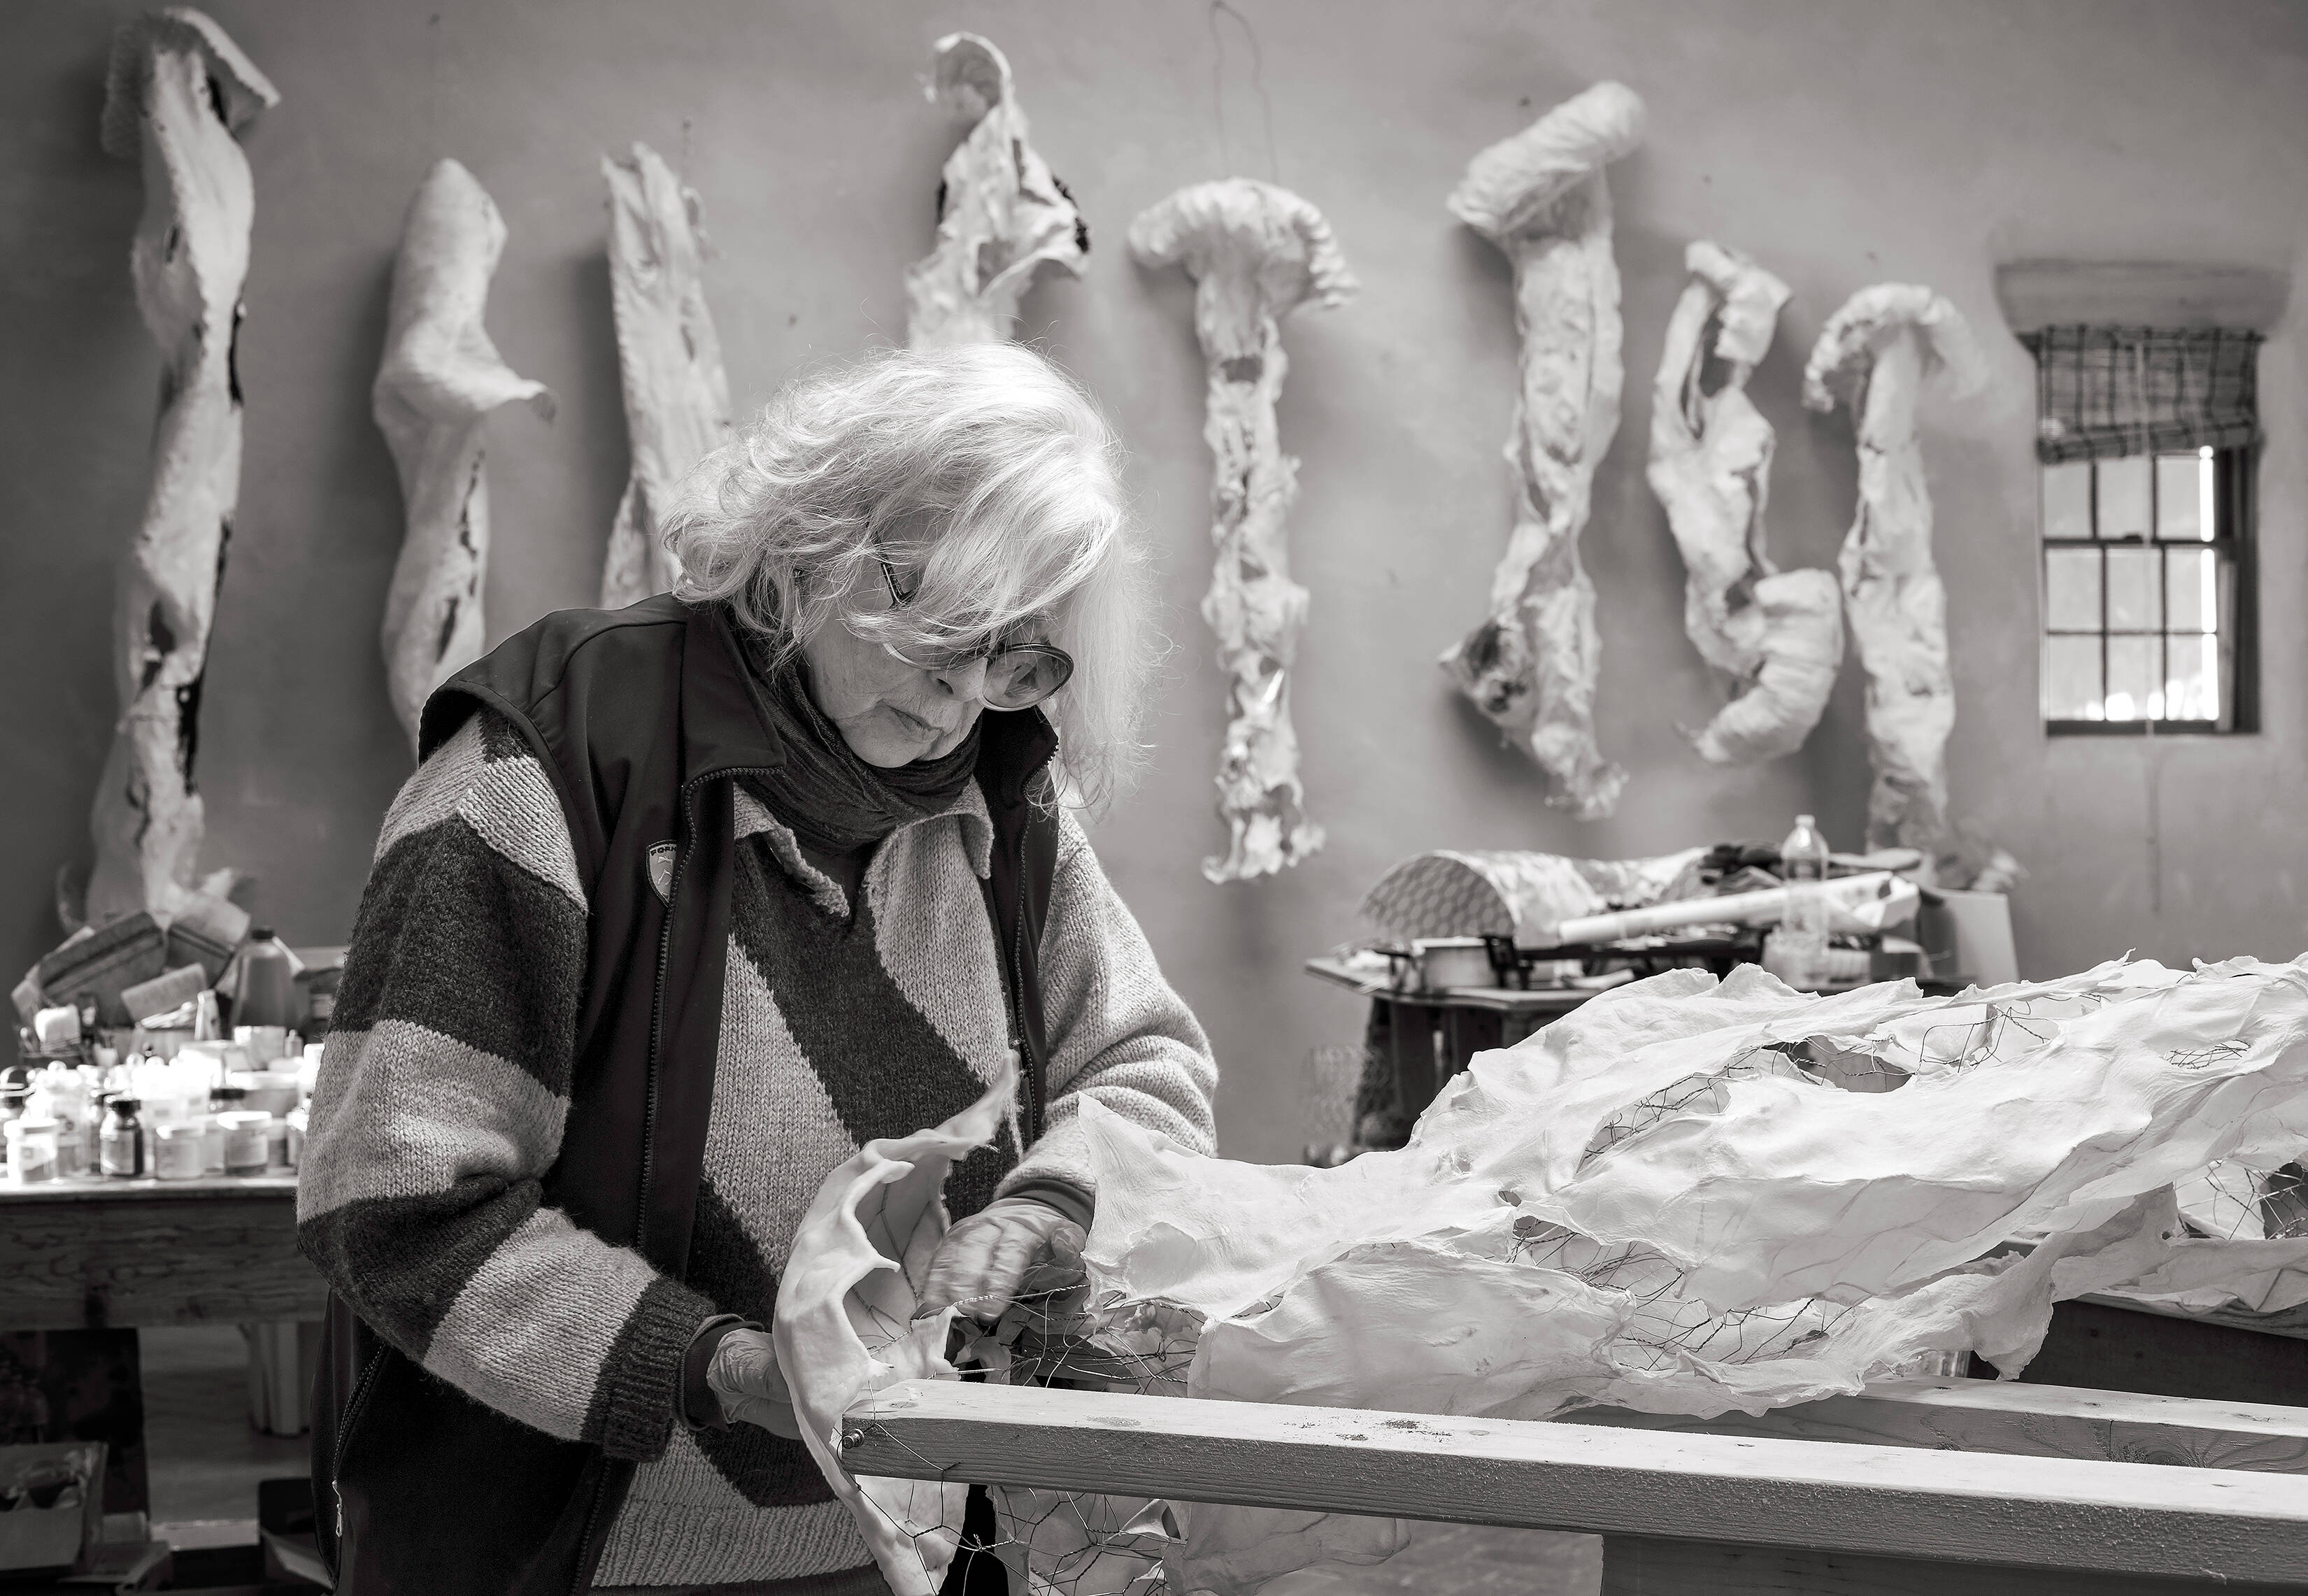 The chemicals that nearly killed Lynda Benglis